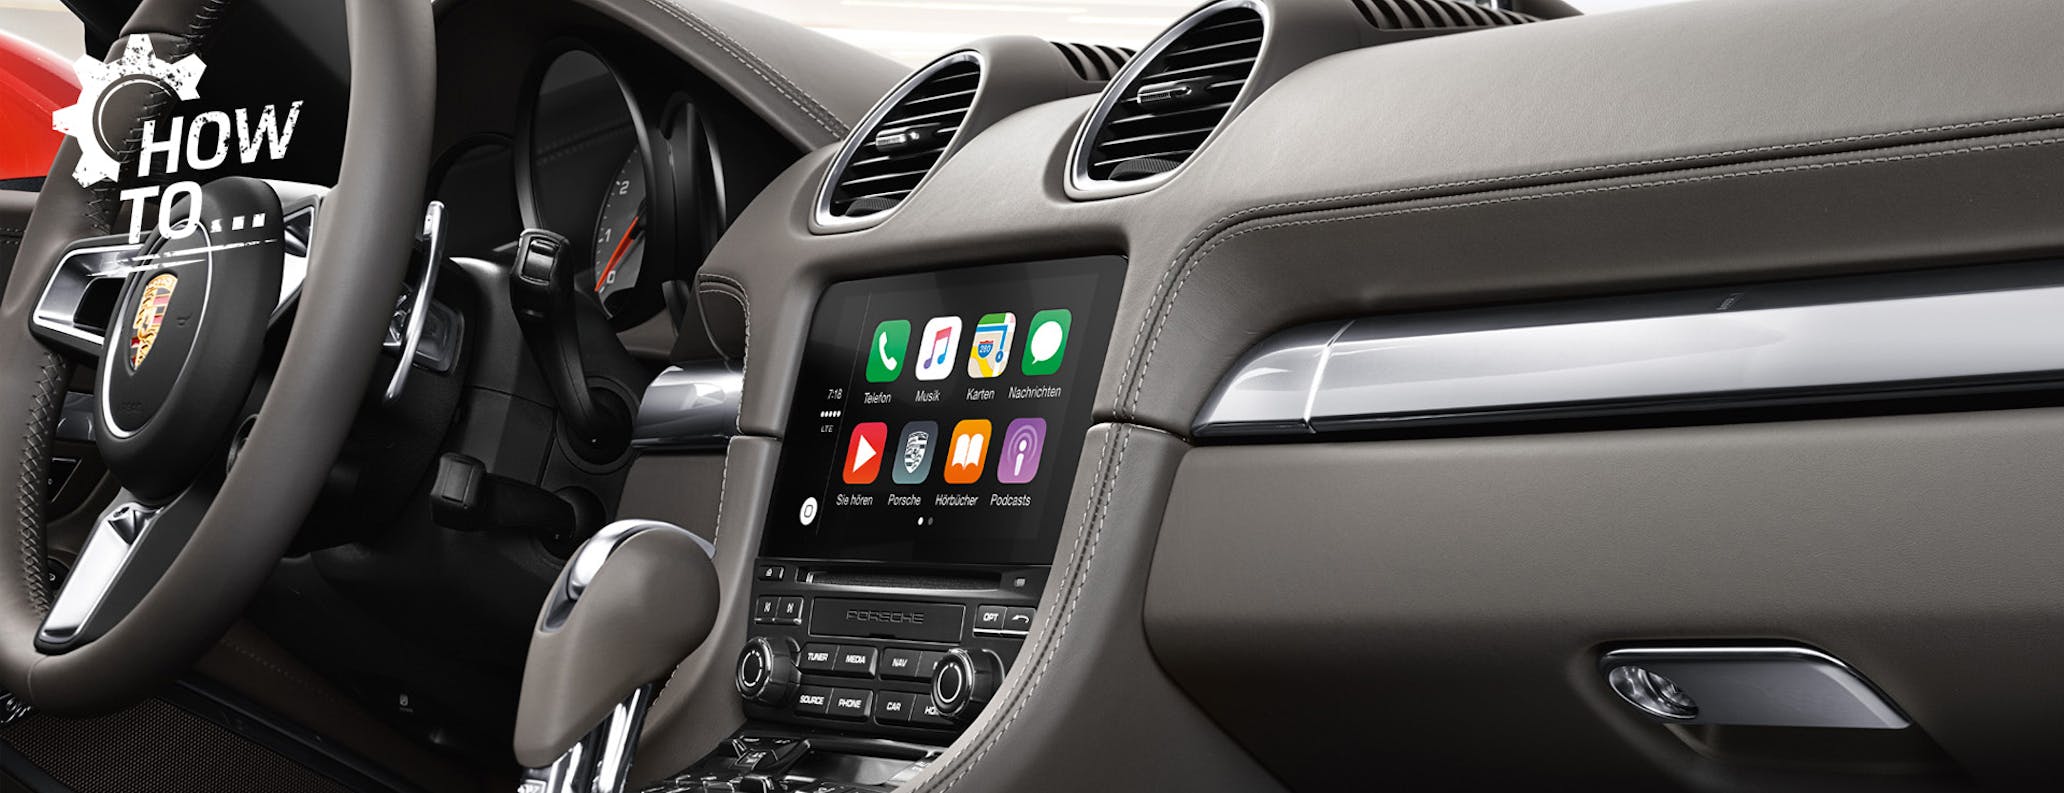 Dashboard of Porsche Cayenne with Apple CarPlay on centre display